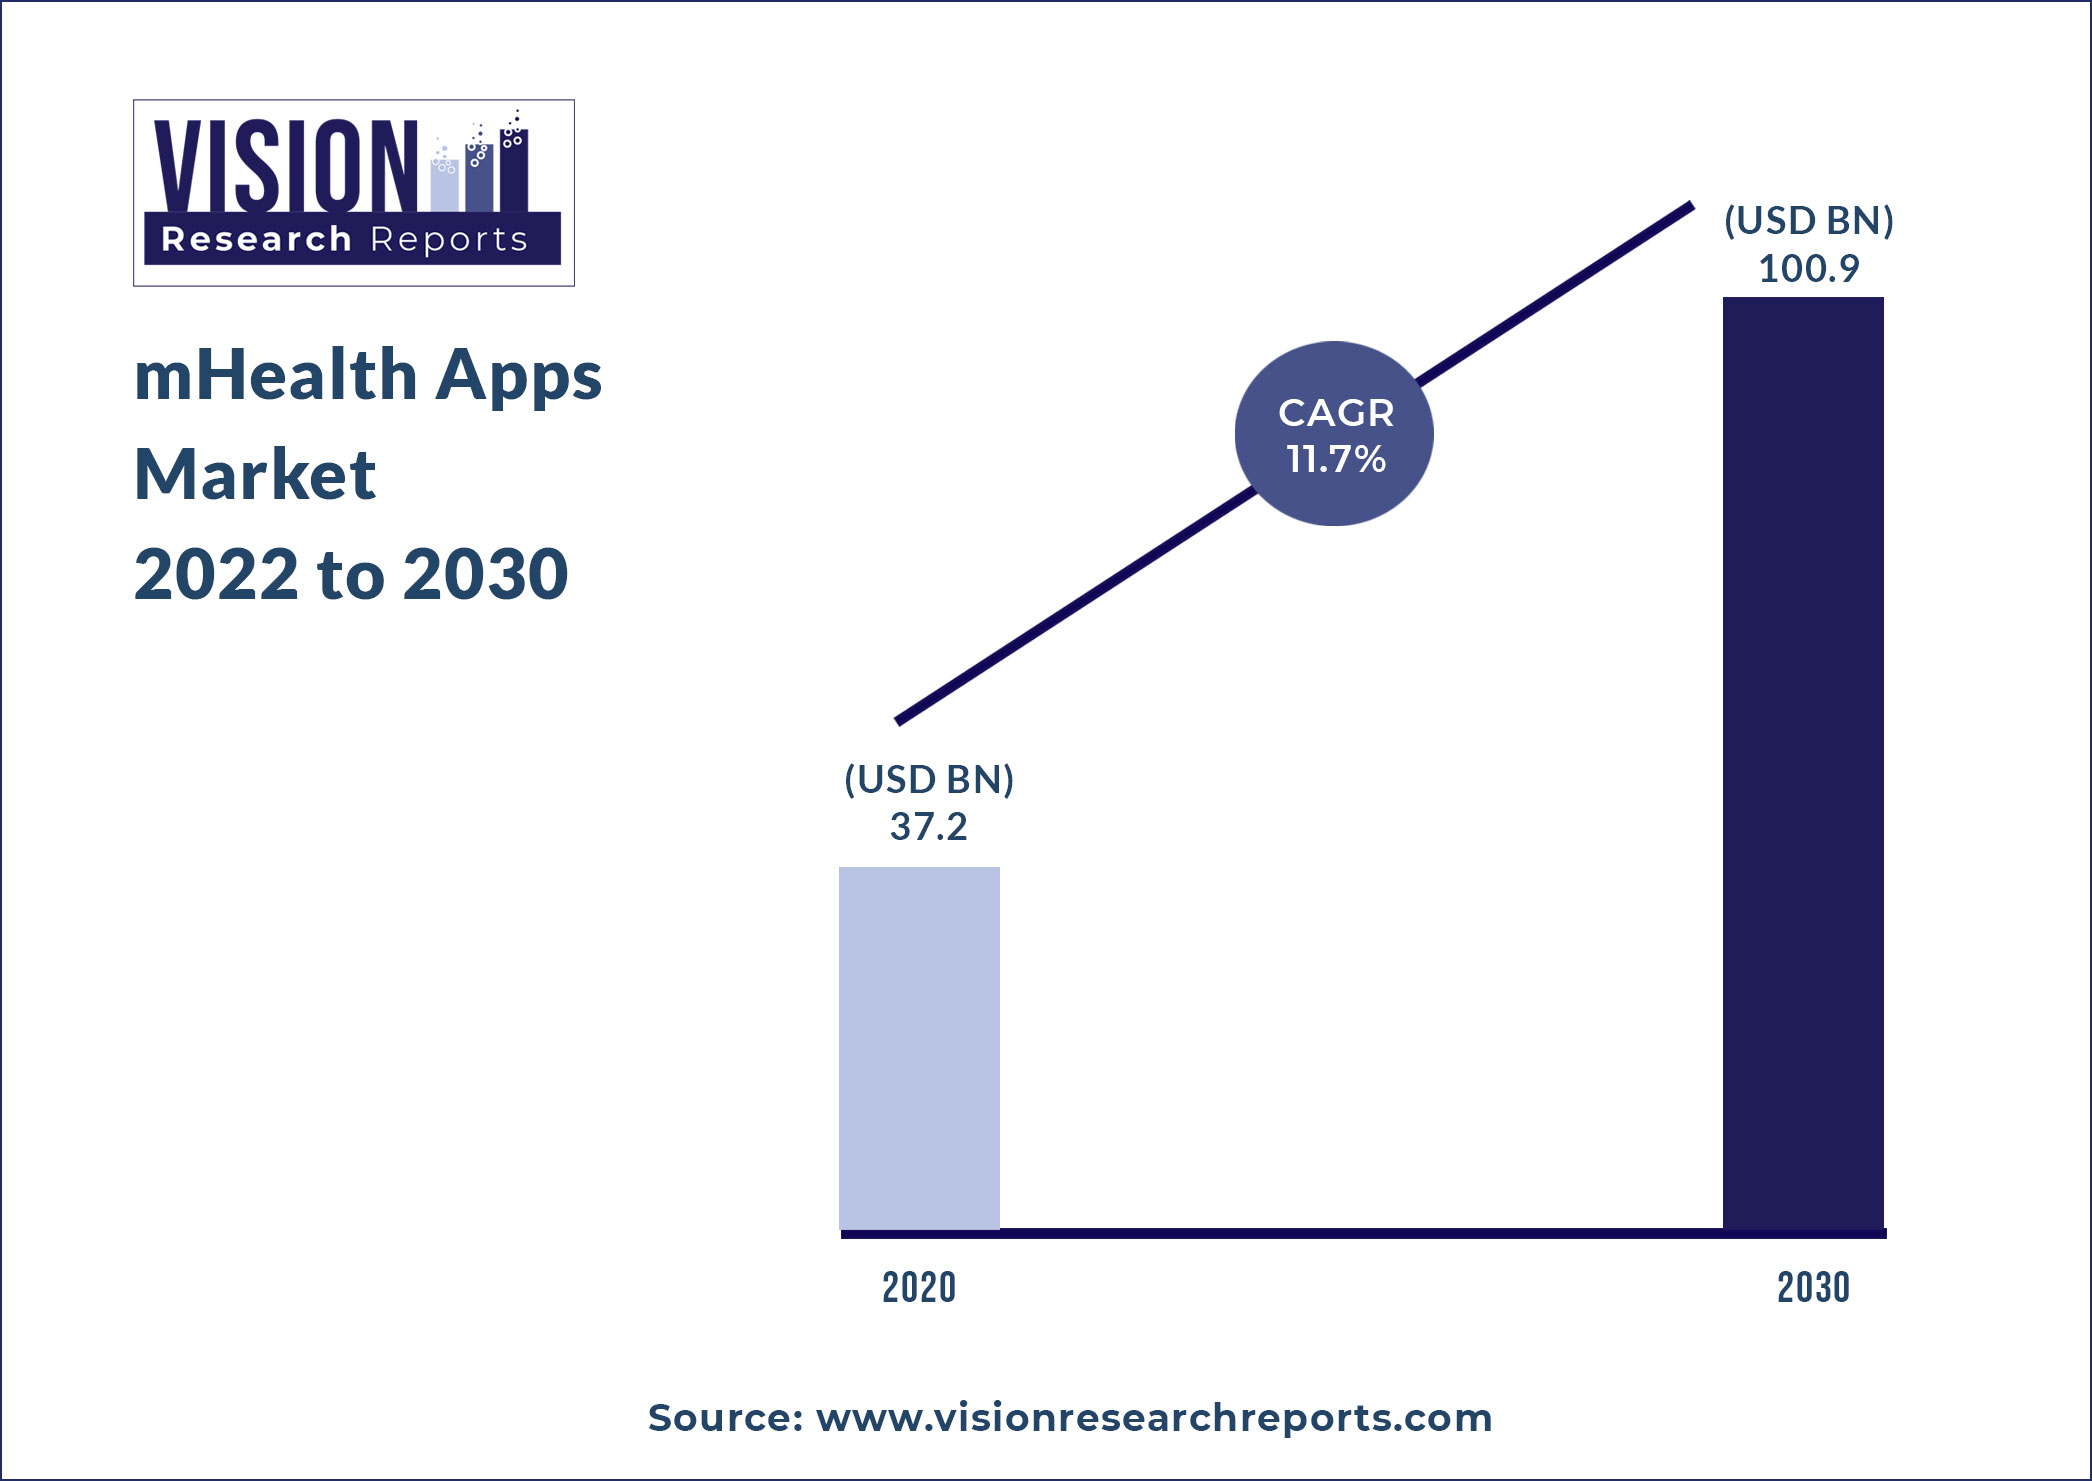 mHealth Apps Market Size 2022 to 2030